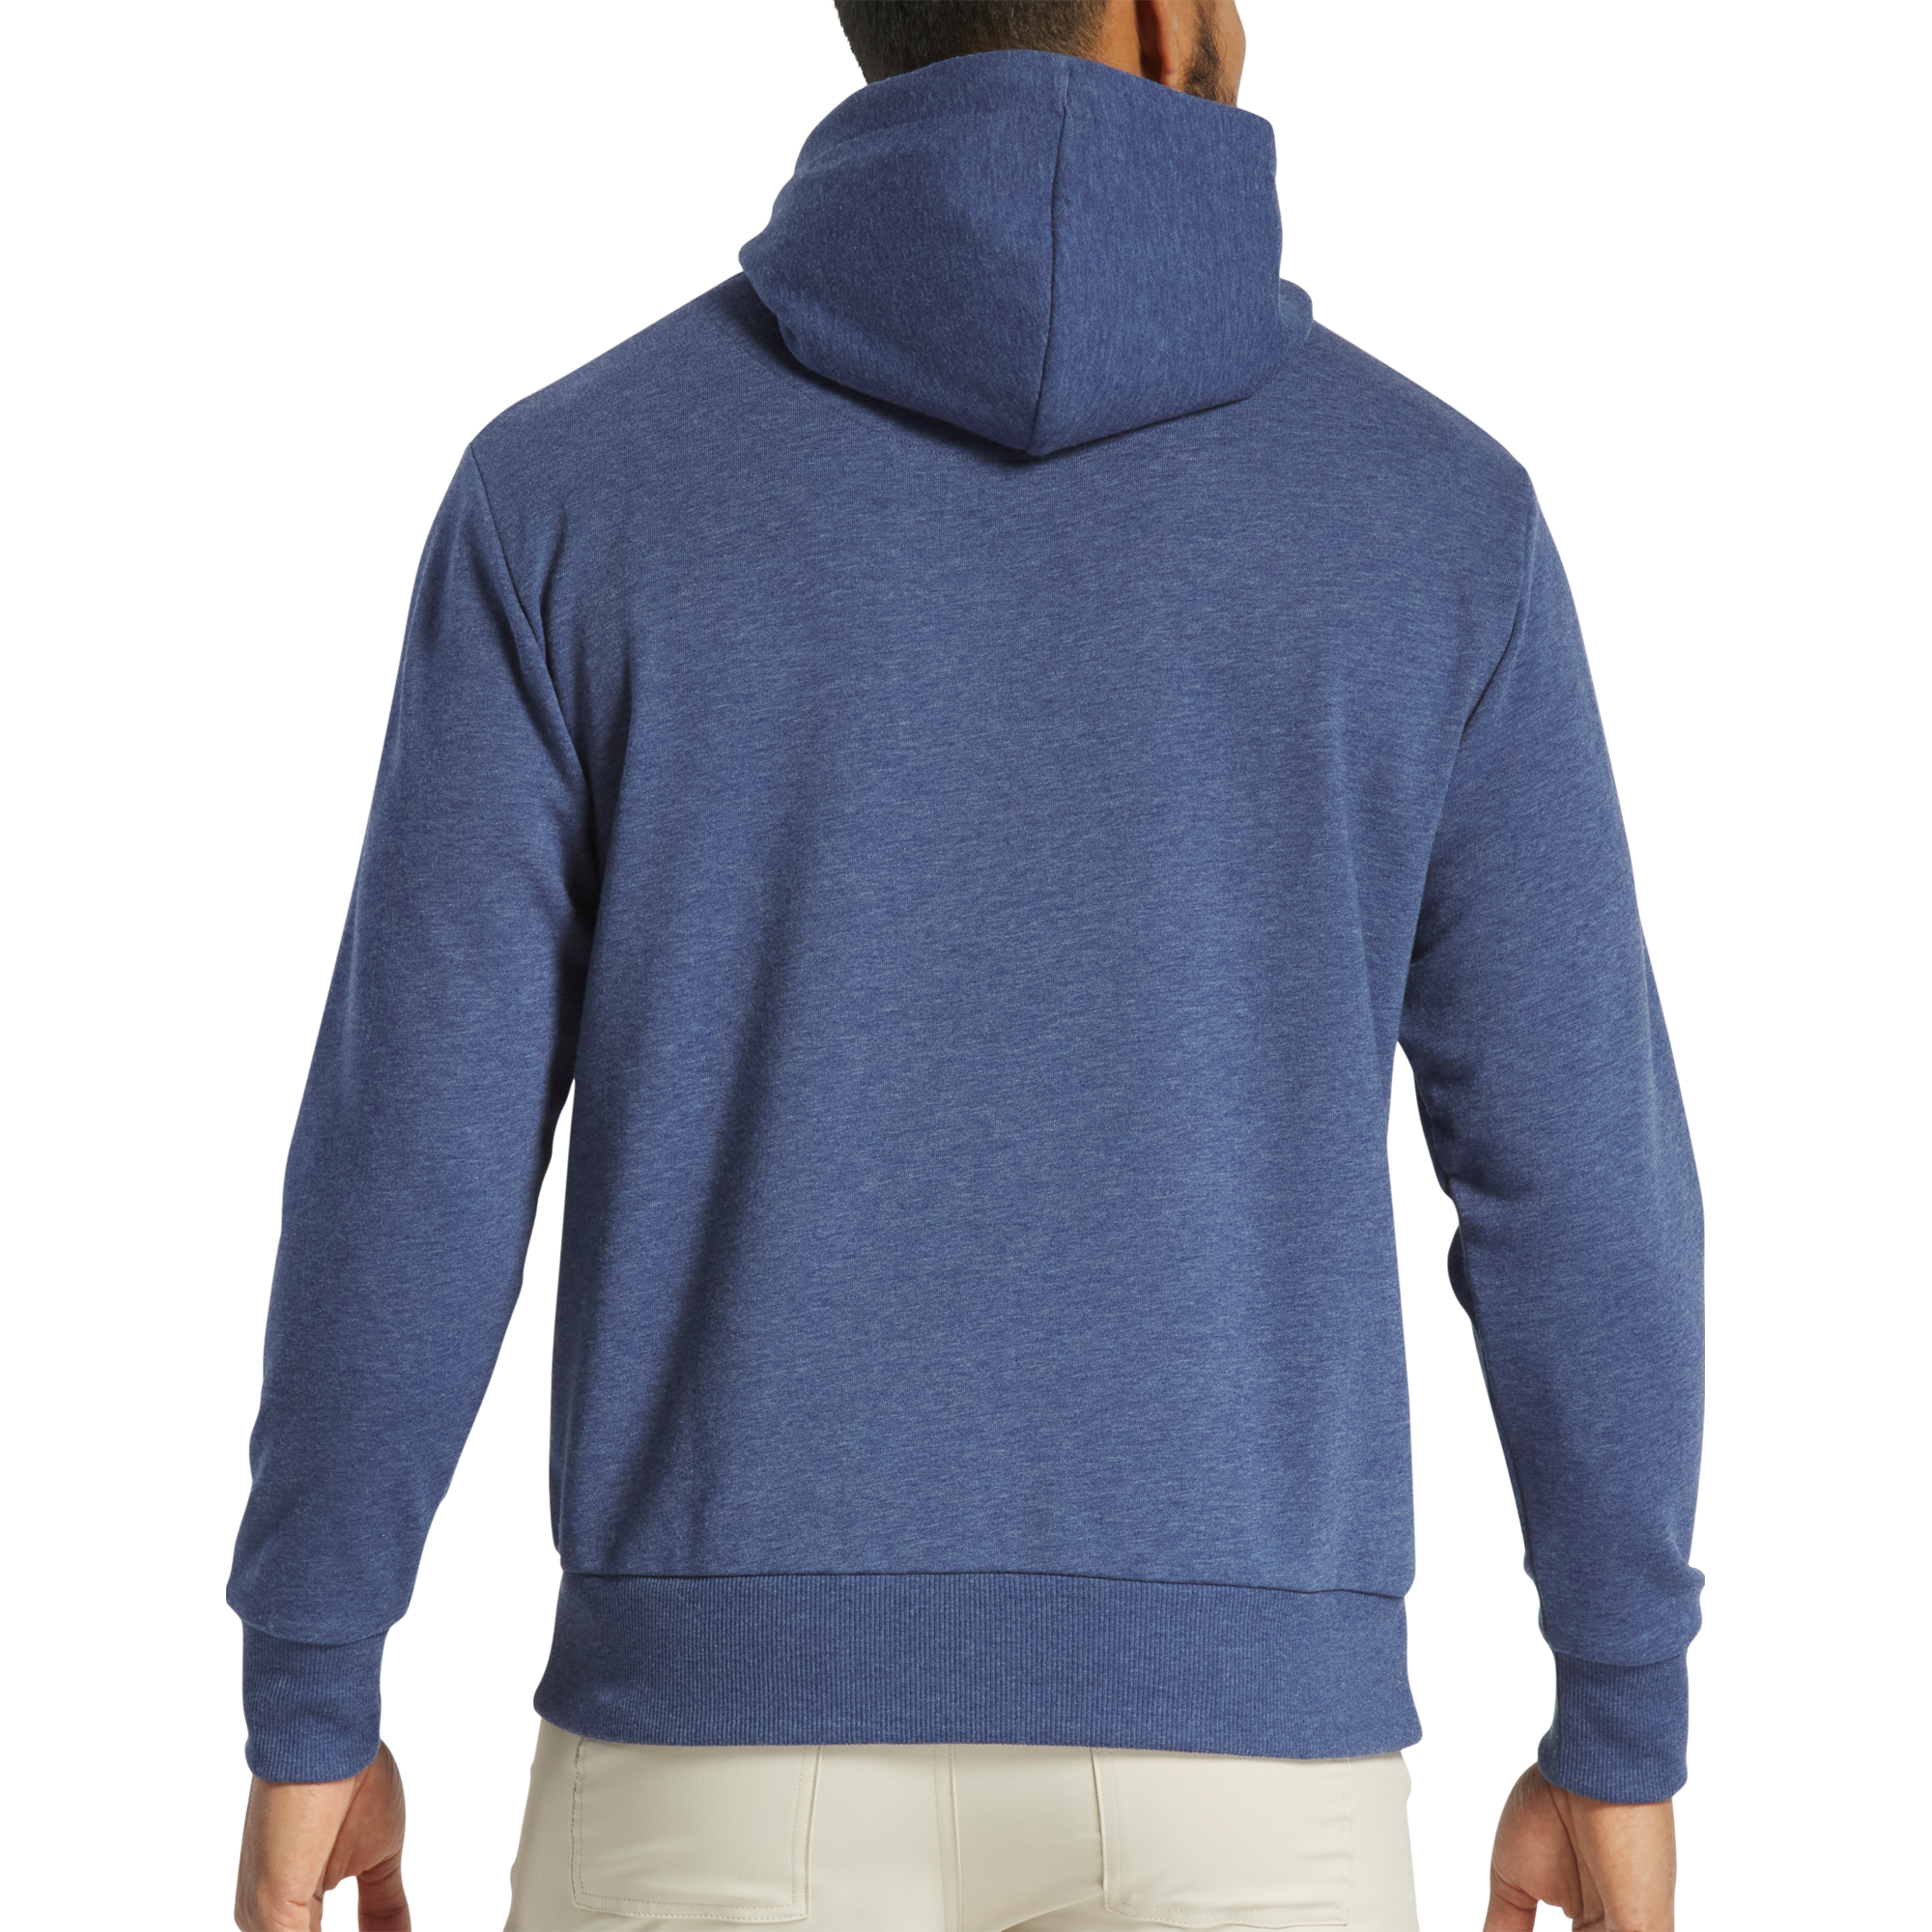 152nd Open Championship Postage Stamp Hoodie